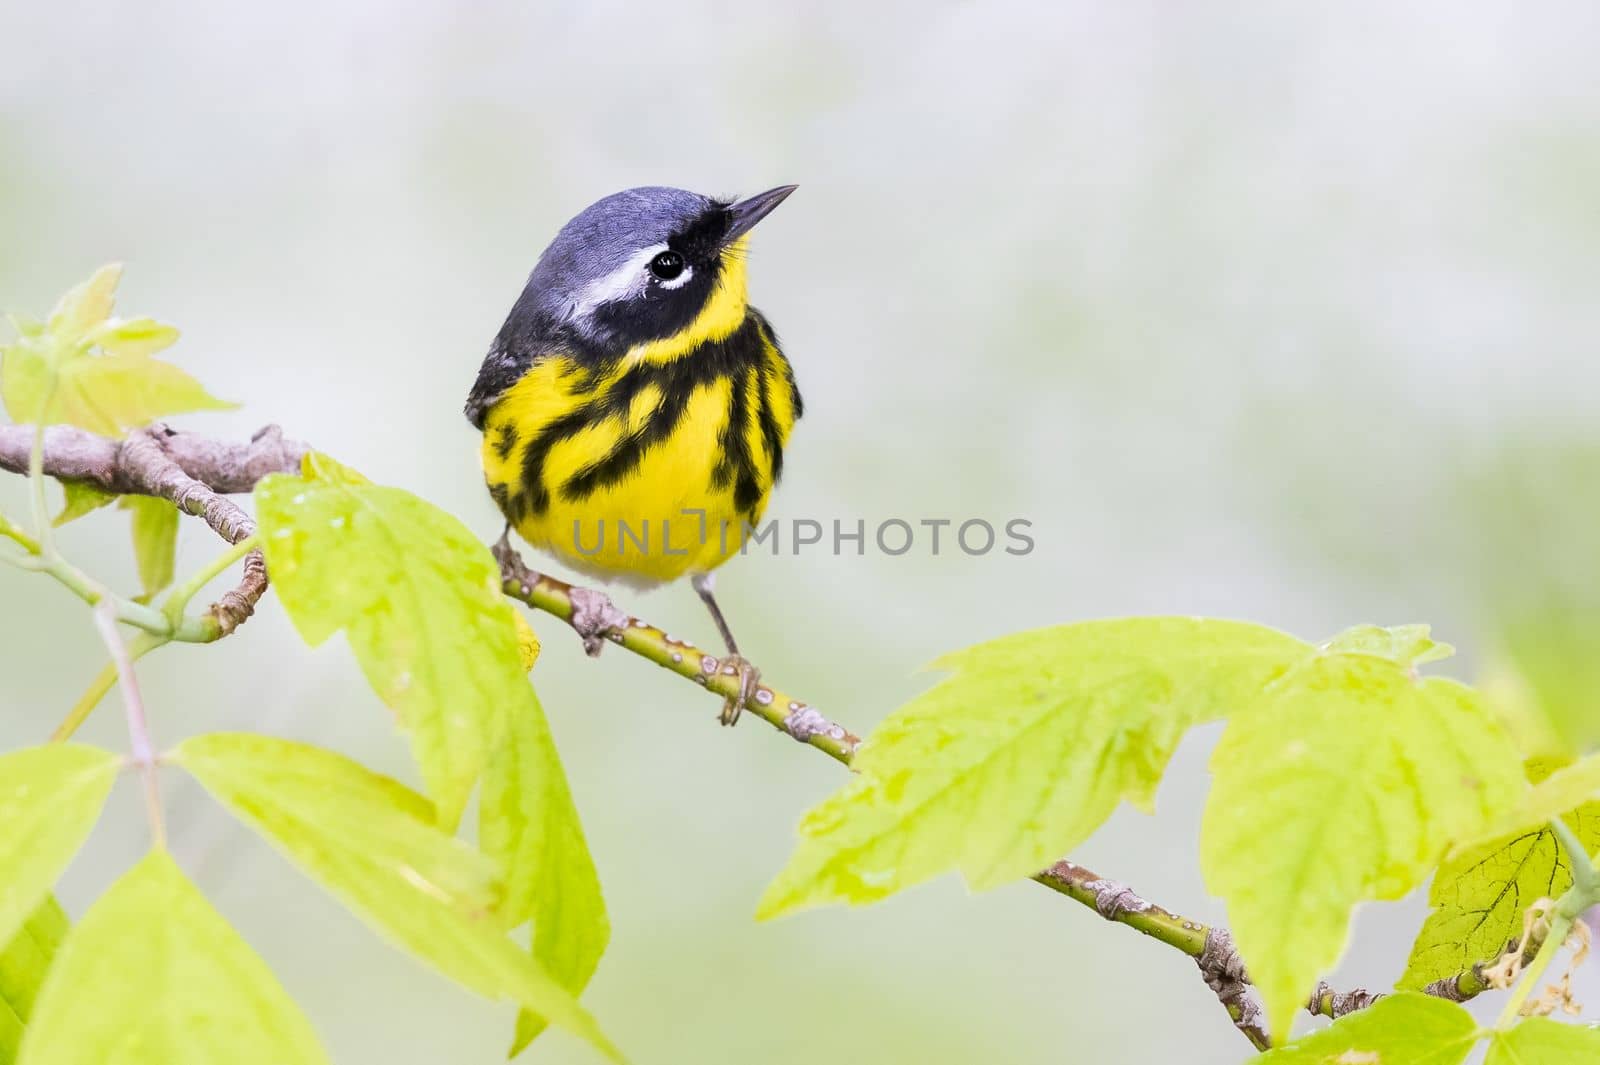 Magnolia warbler perched on a branch in Ohio